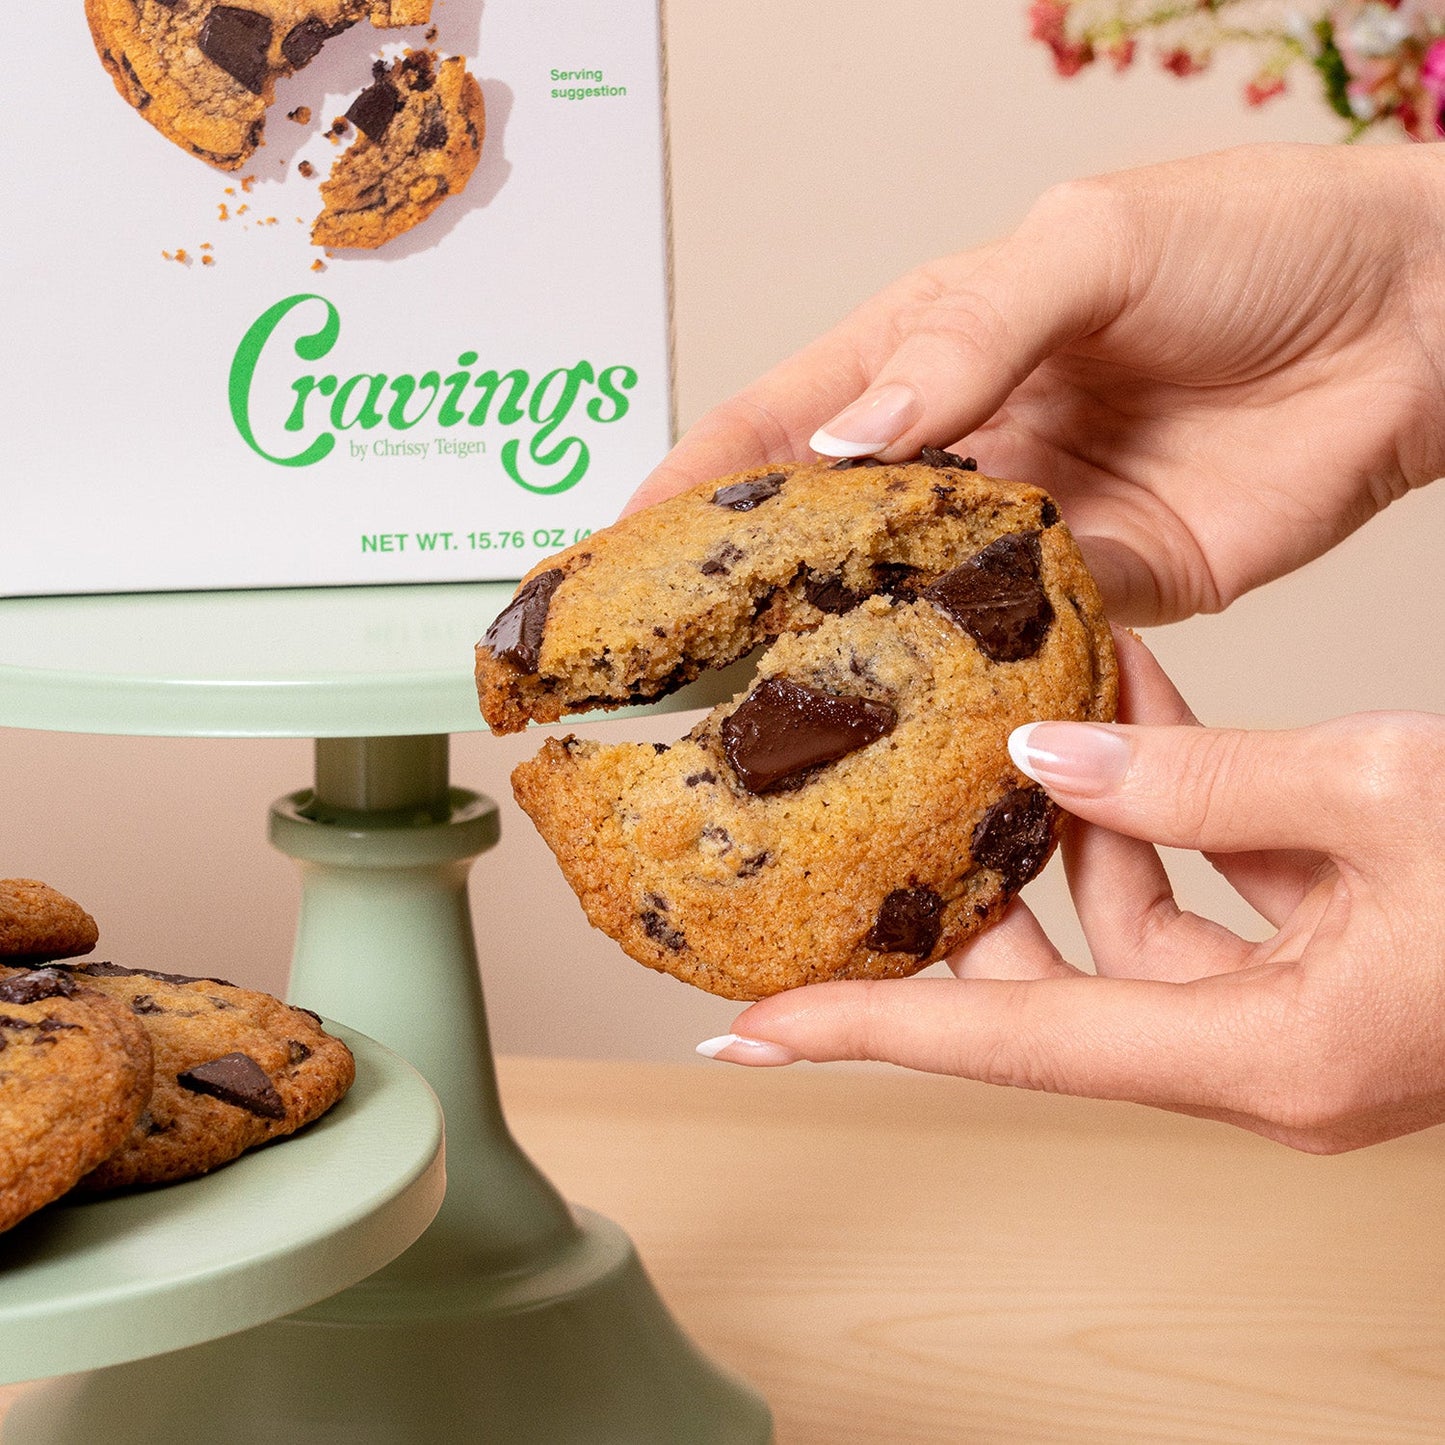 Cravings by Chrissy Teigen: The Perfect Chocolate Chunk Cookie Mix-3 Pack